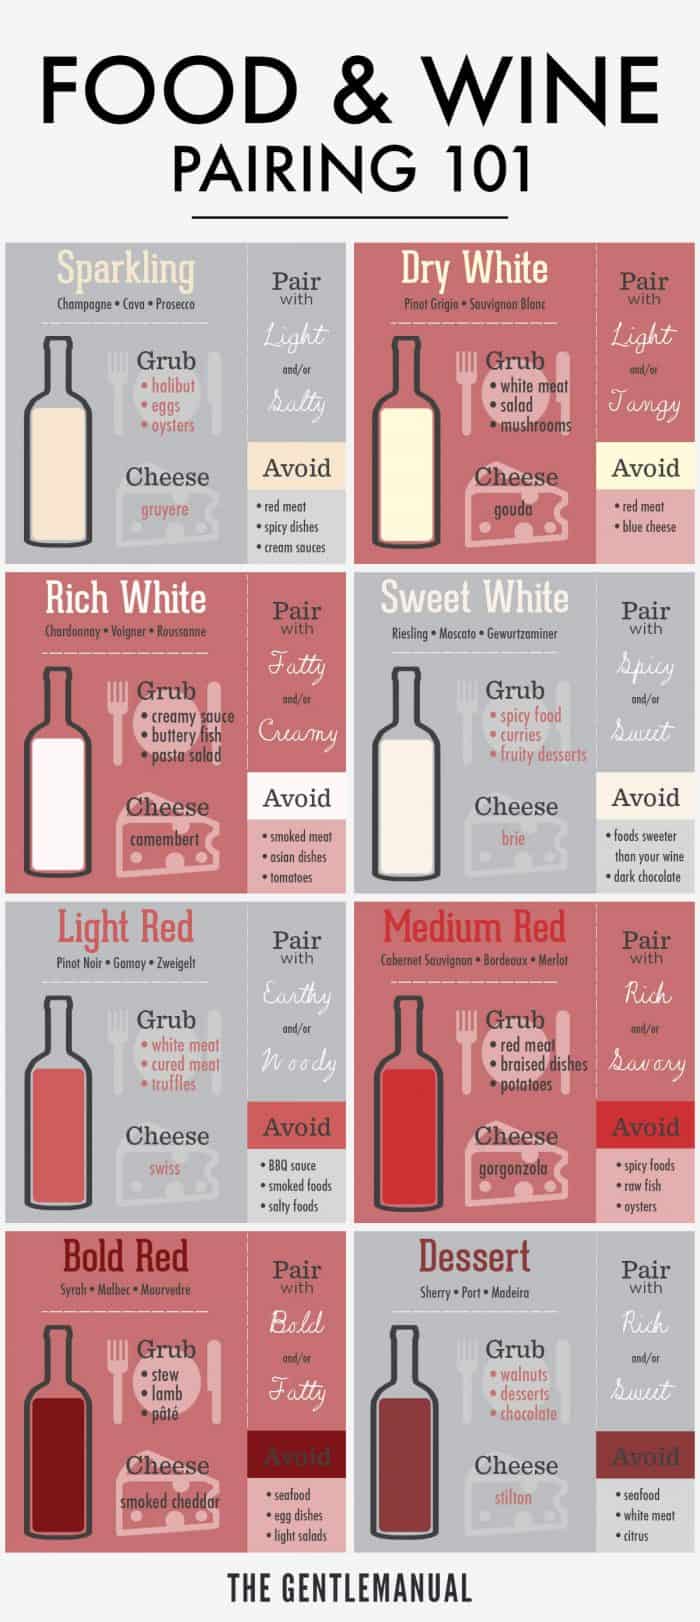 Food and Wine Pairing 101